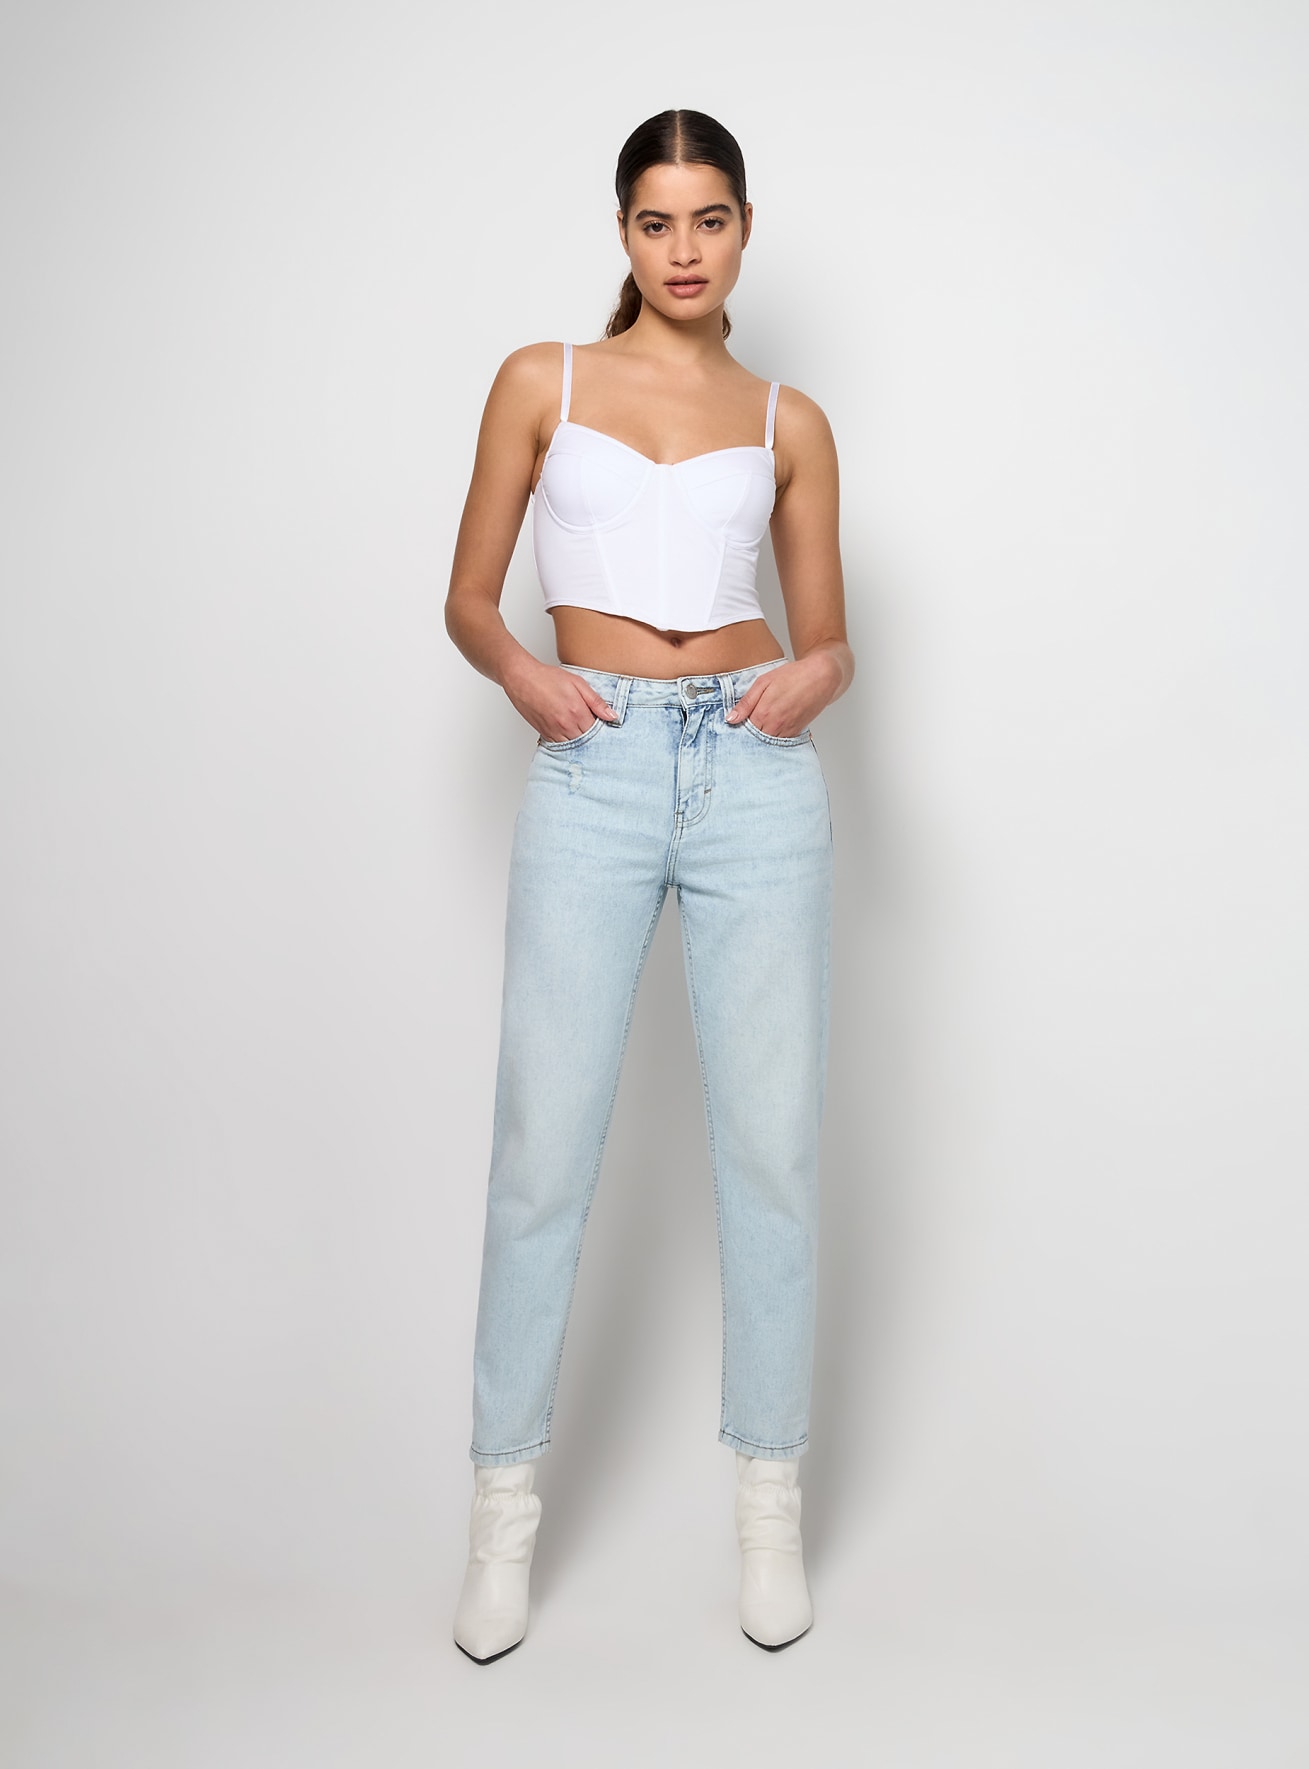 TIORU Jeans for Women Pants Women's Jeans Pants for wome High Waist Ripped  Mom Fit Jeans Jeans (Color : Light Wash, Size : W30 L32) : :  Clothing, Shoes & Accessories